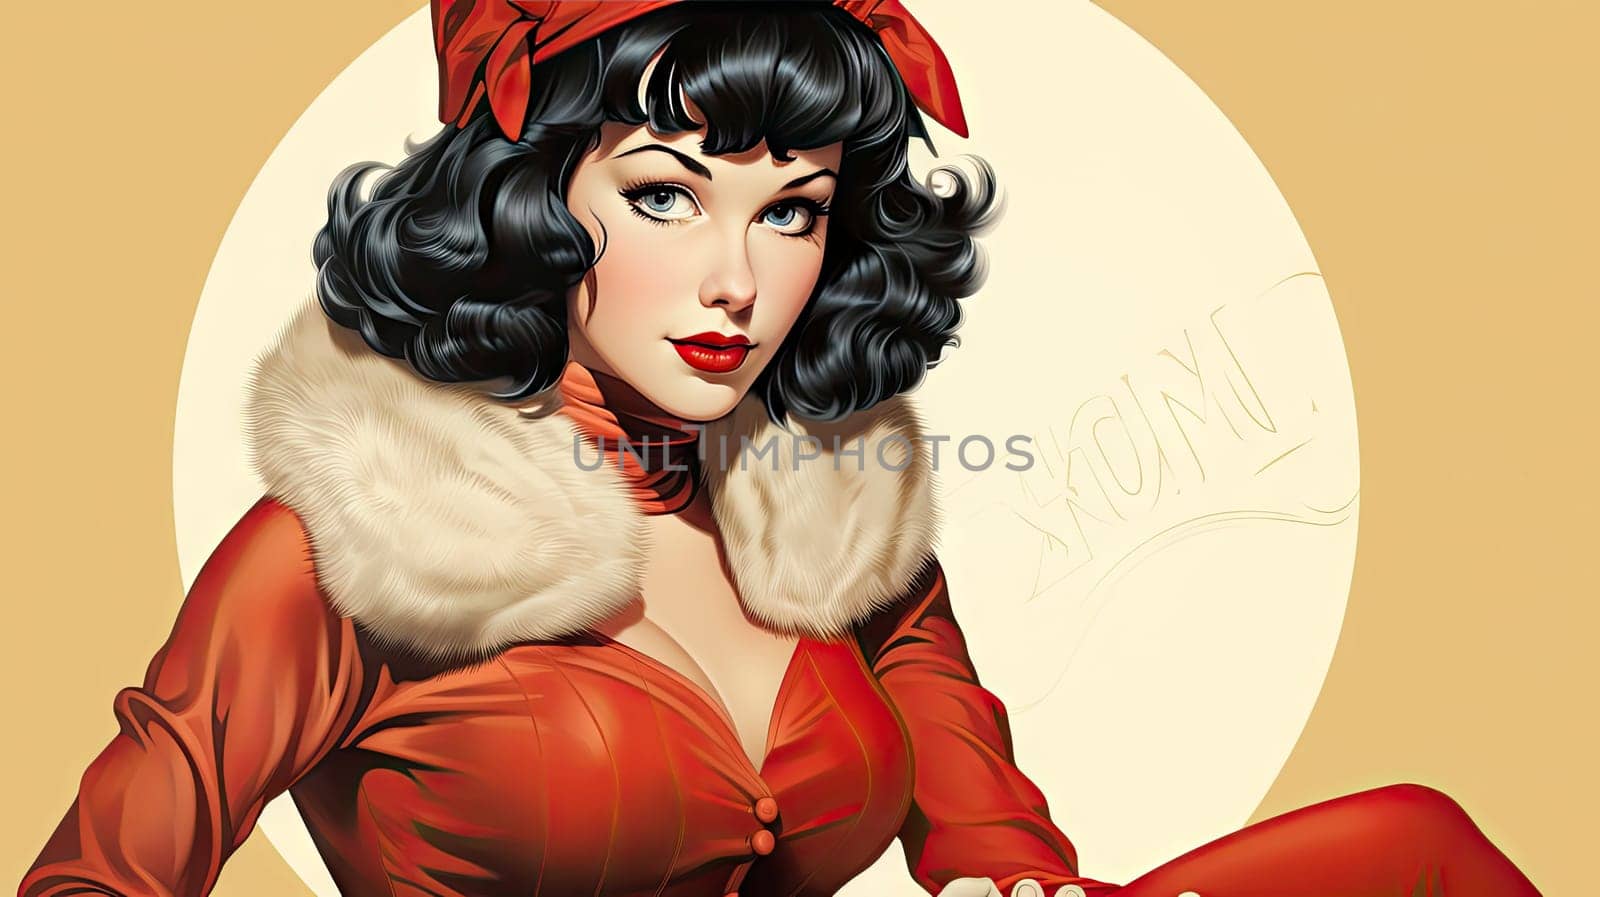 Beautiful pinup girl dressed as Santa Claus with gifts. by jbruiz78